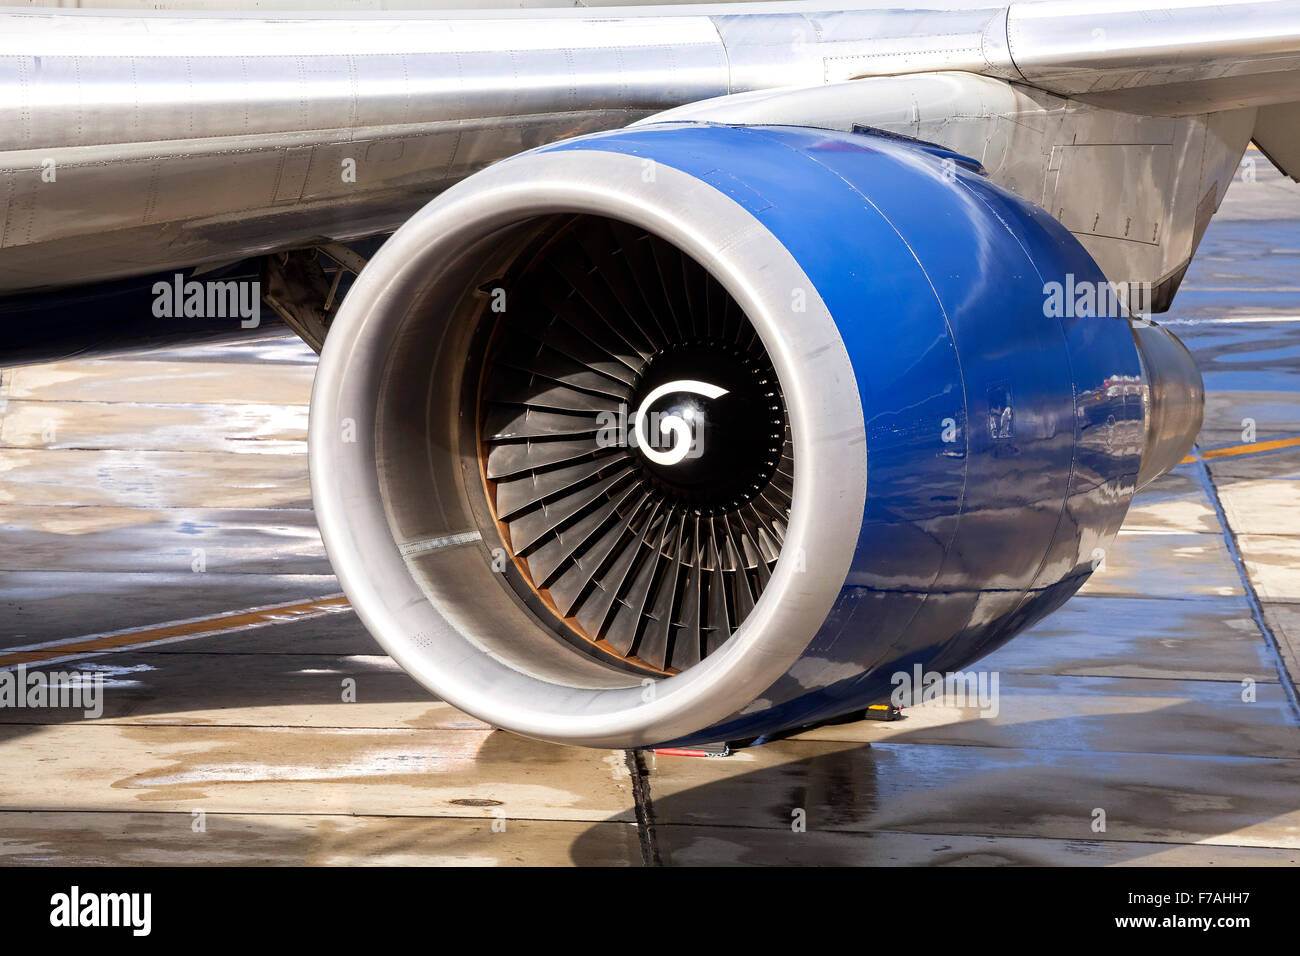 Close up picture of an engine of a passenger airplane. Stock Photo